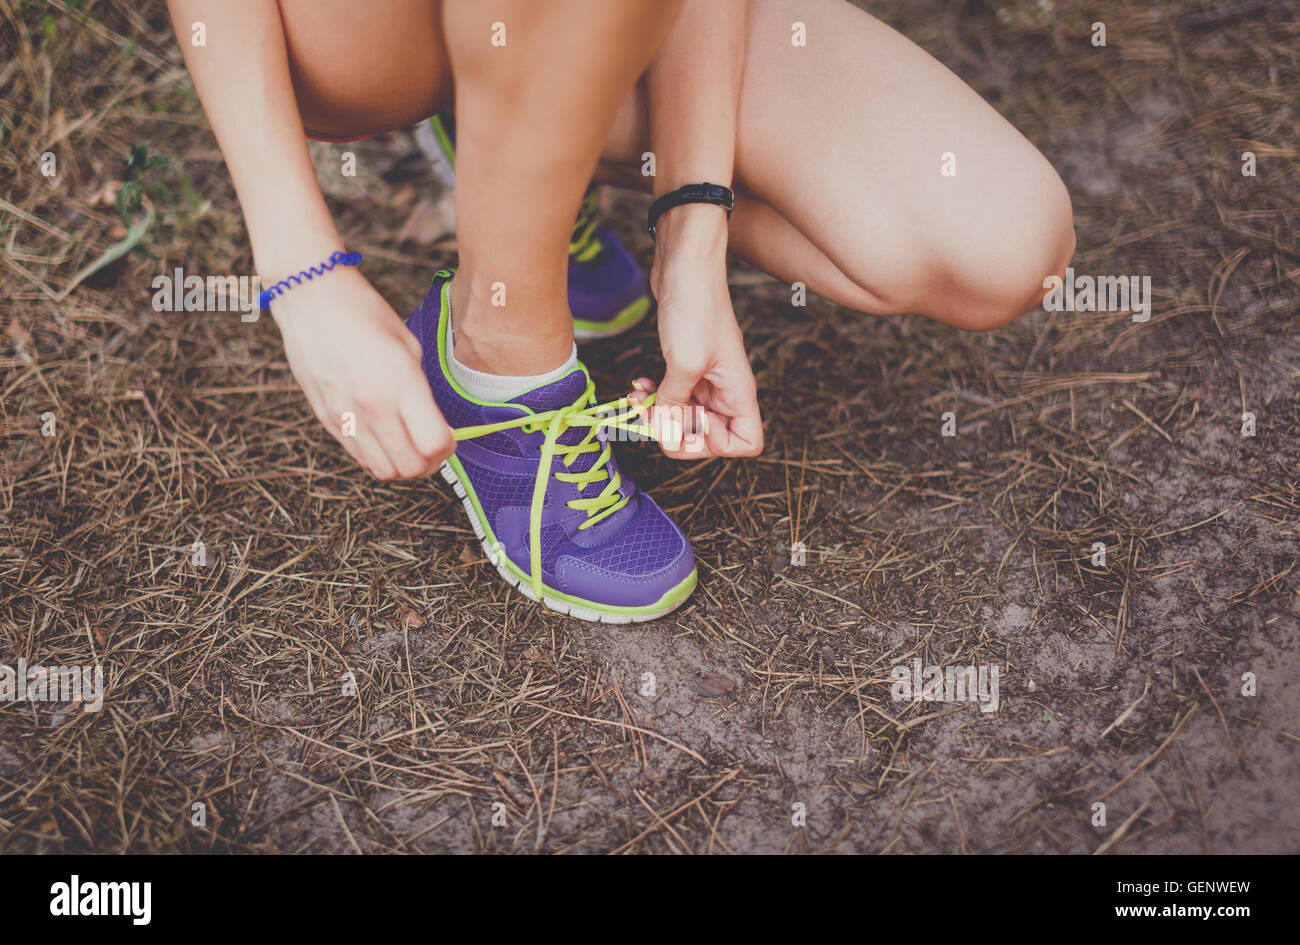 Runner woman tying shoelaces. Tie shoelaces. sport, fitness, exercise and lifestyle Stock Photo